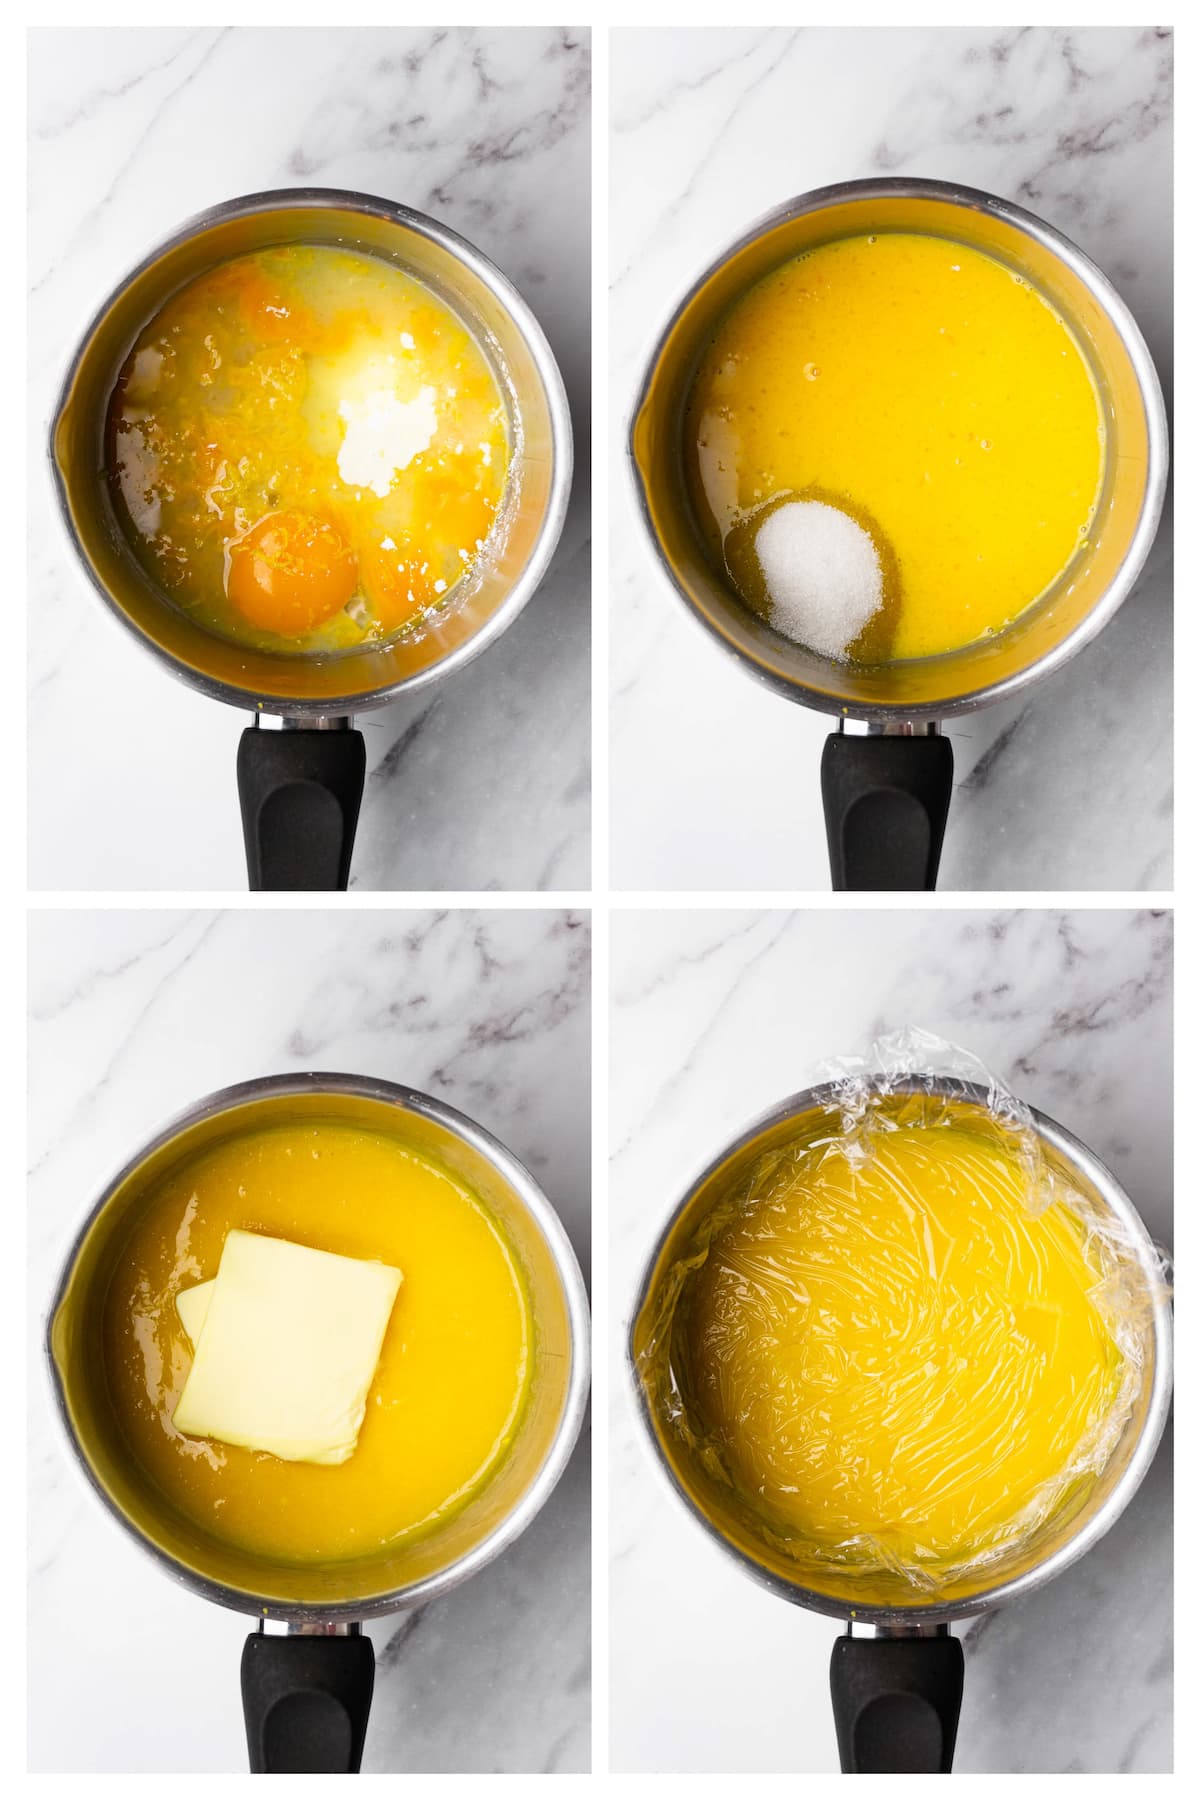 Collage image showing how to make lemon curd.